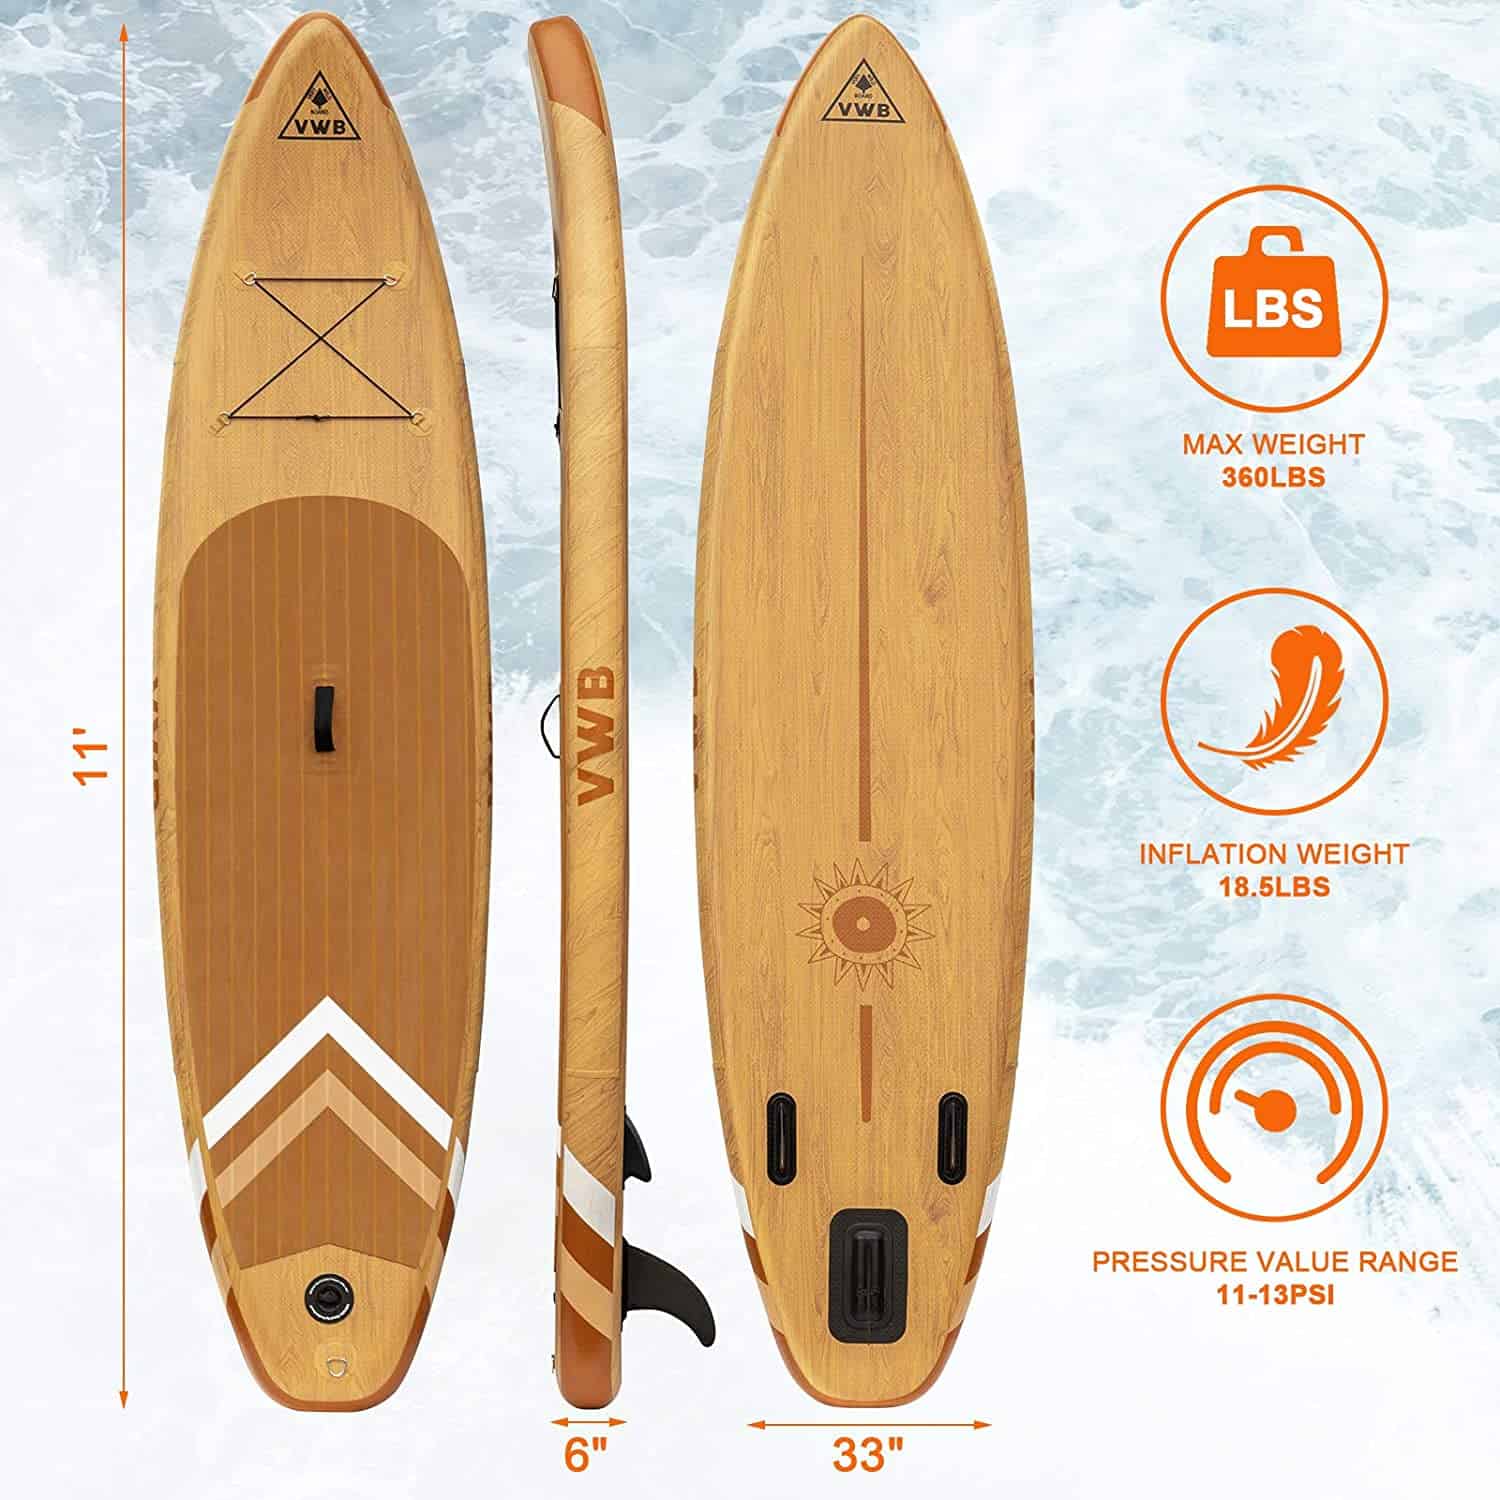 vwb_inflatable_stand_up_paddle_board_vwb_inflatable_stand-1-1